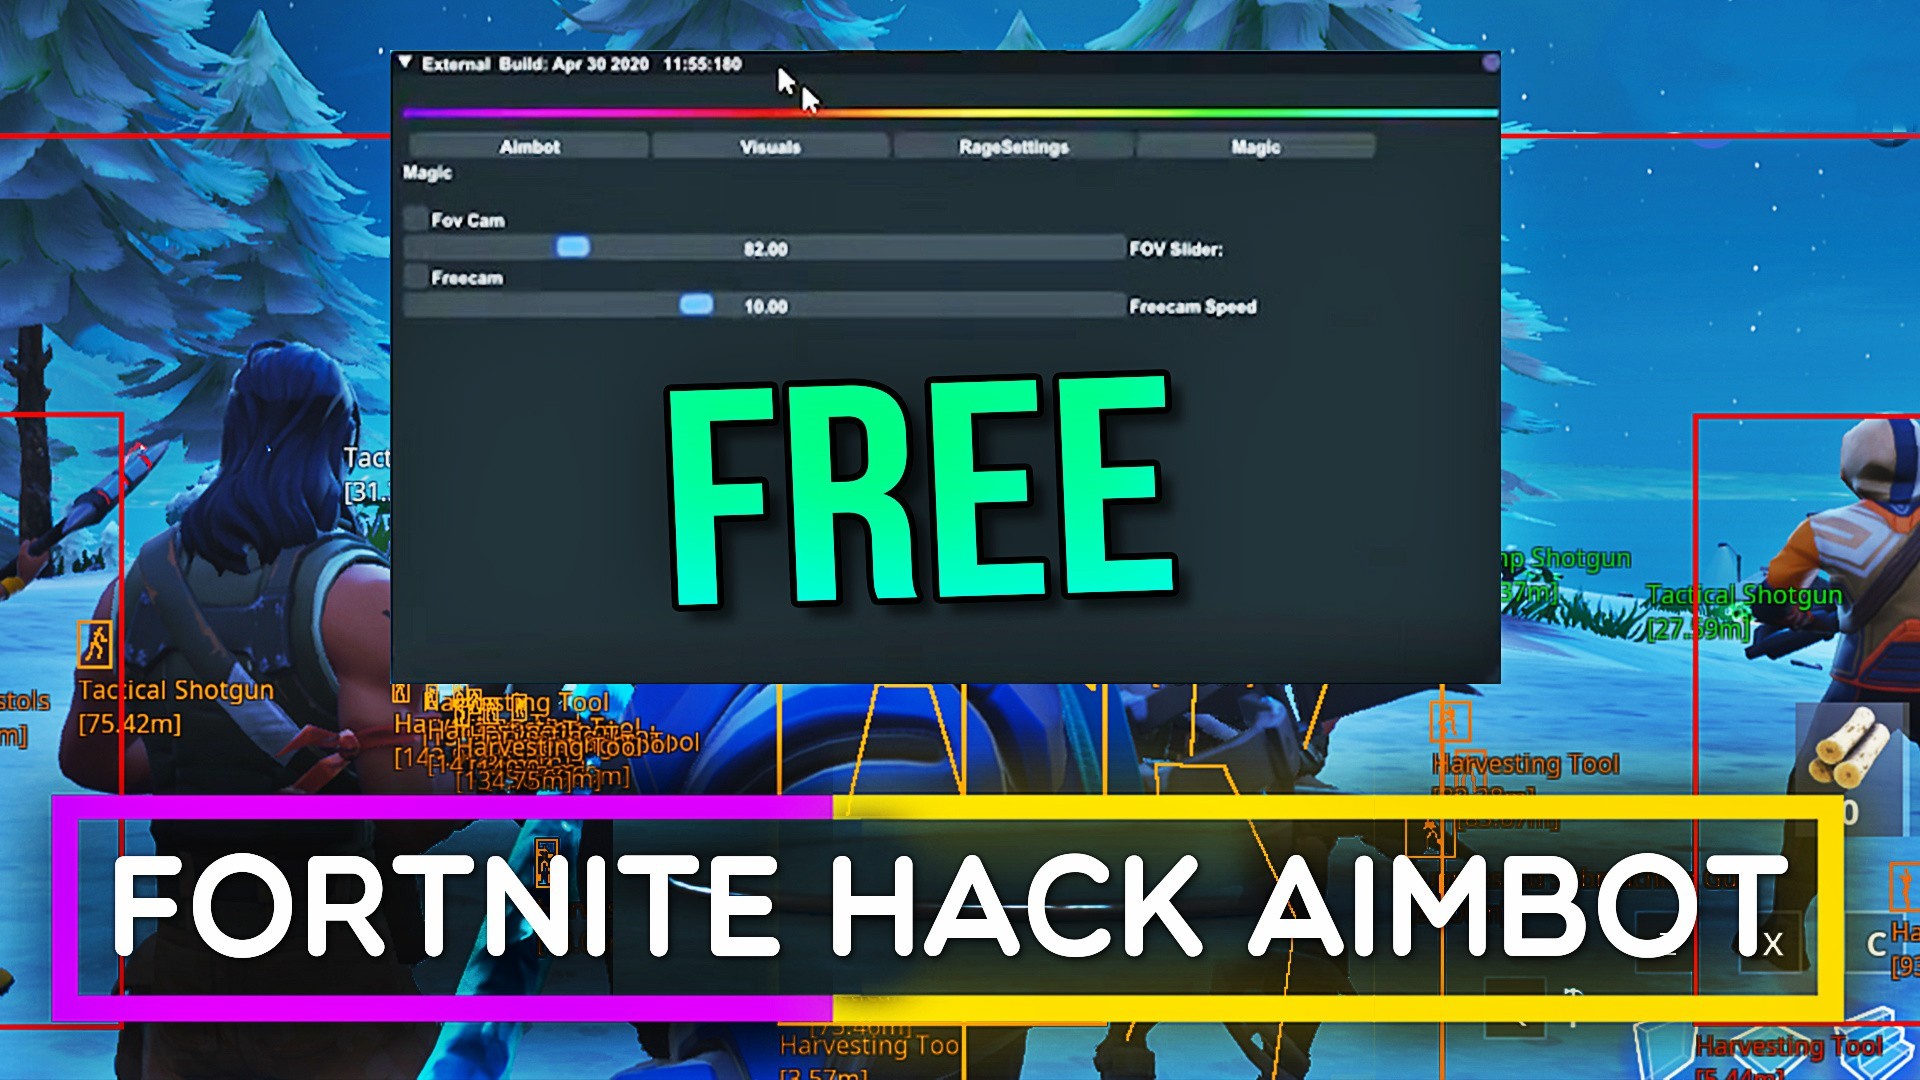 Fortnite Undetected Aimbot, ESP, Misc FREE WITH DOWNLOAD (Working) has WIND...